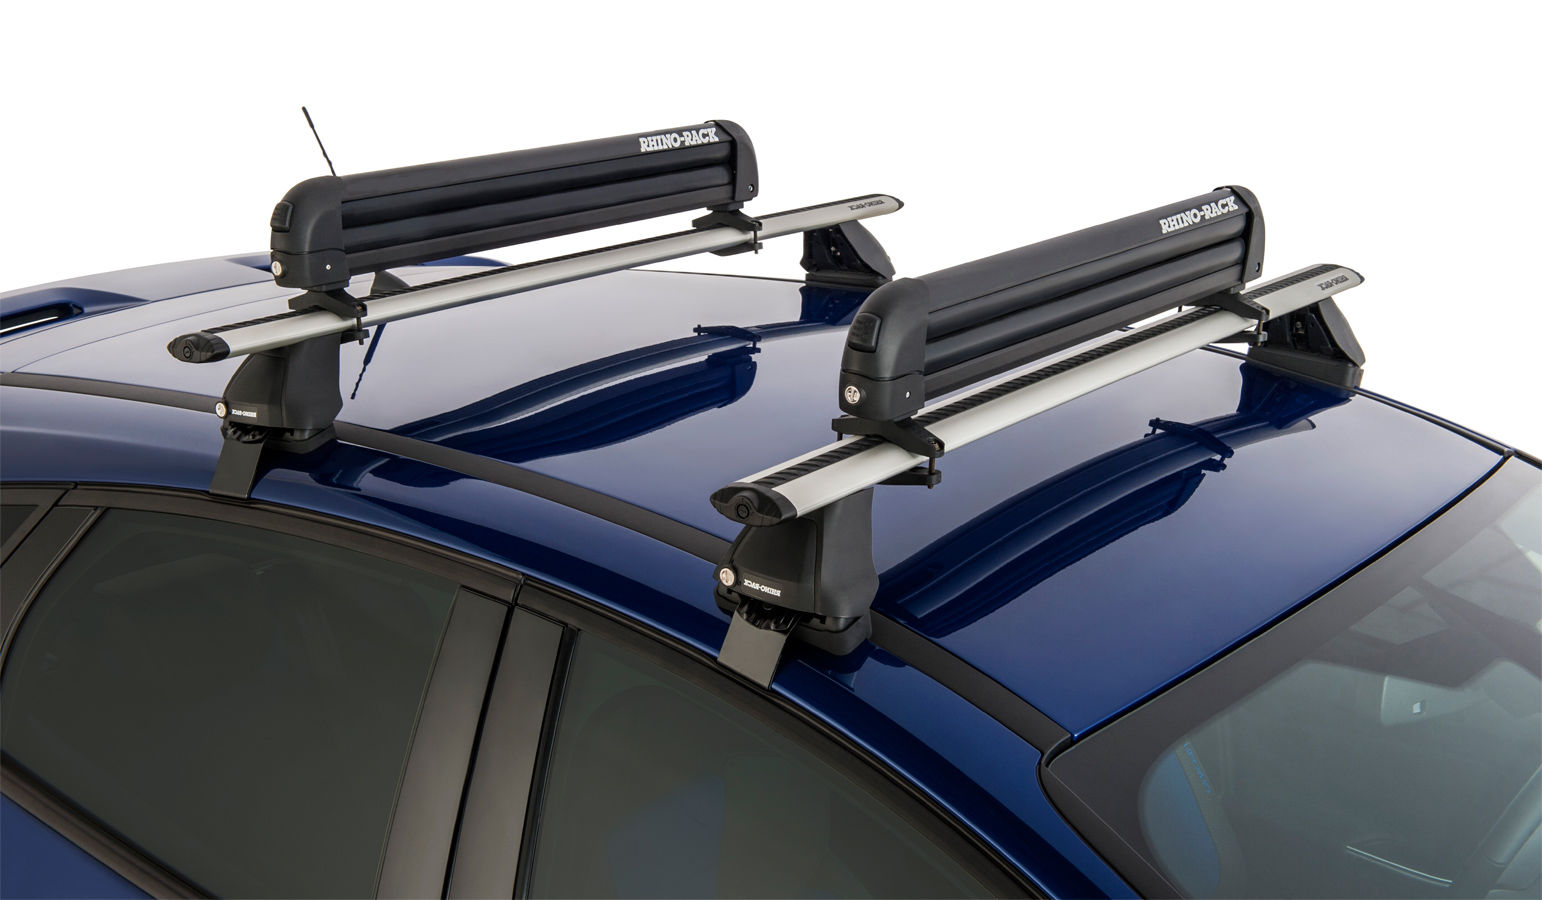 Rhino Rack 576 Ski and Snowboard Carrier - 6 Skis or 4 Snowboards